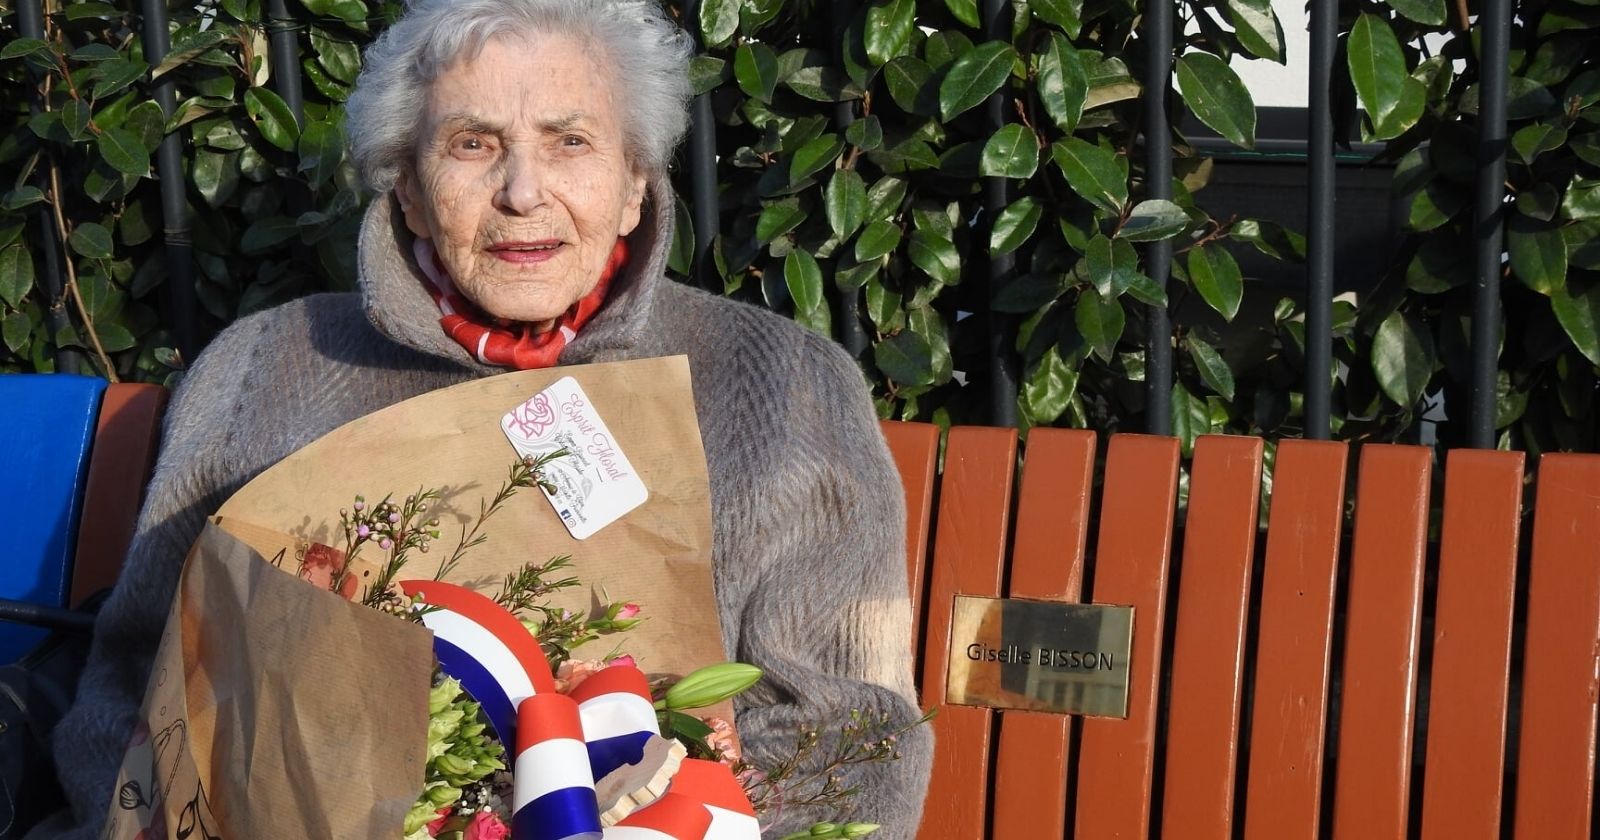 A town in Normandy puts up a bench so Giselle, 101, can take a break along the way